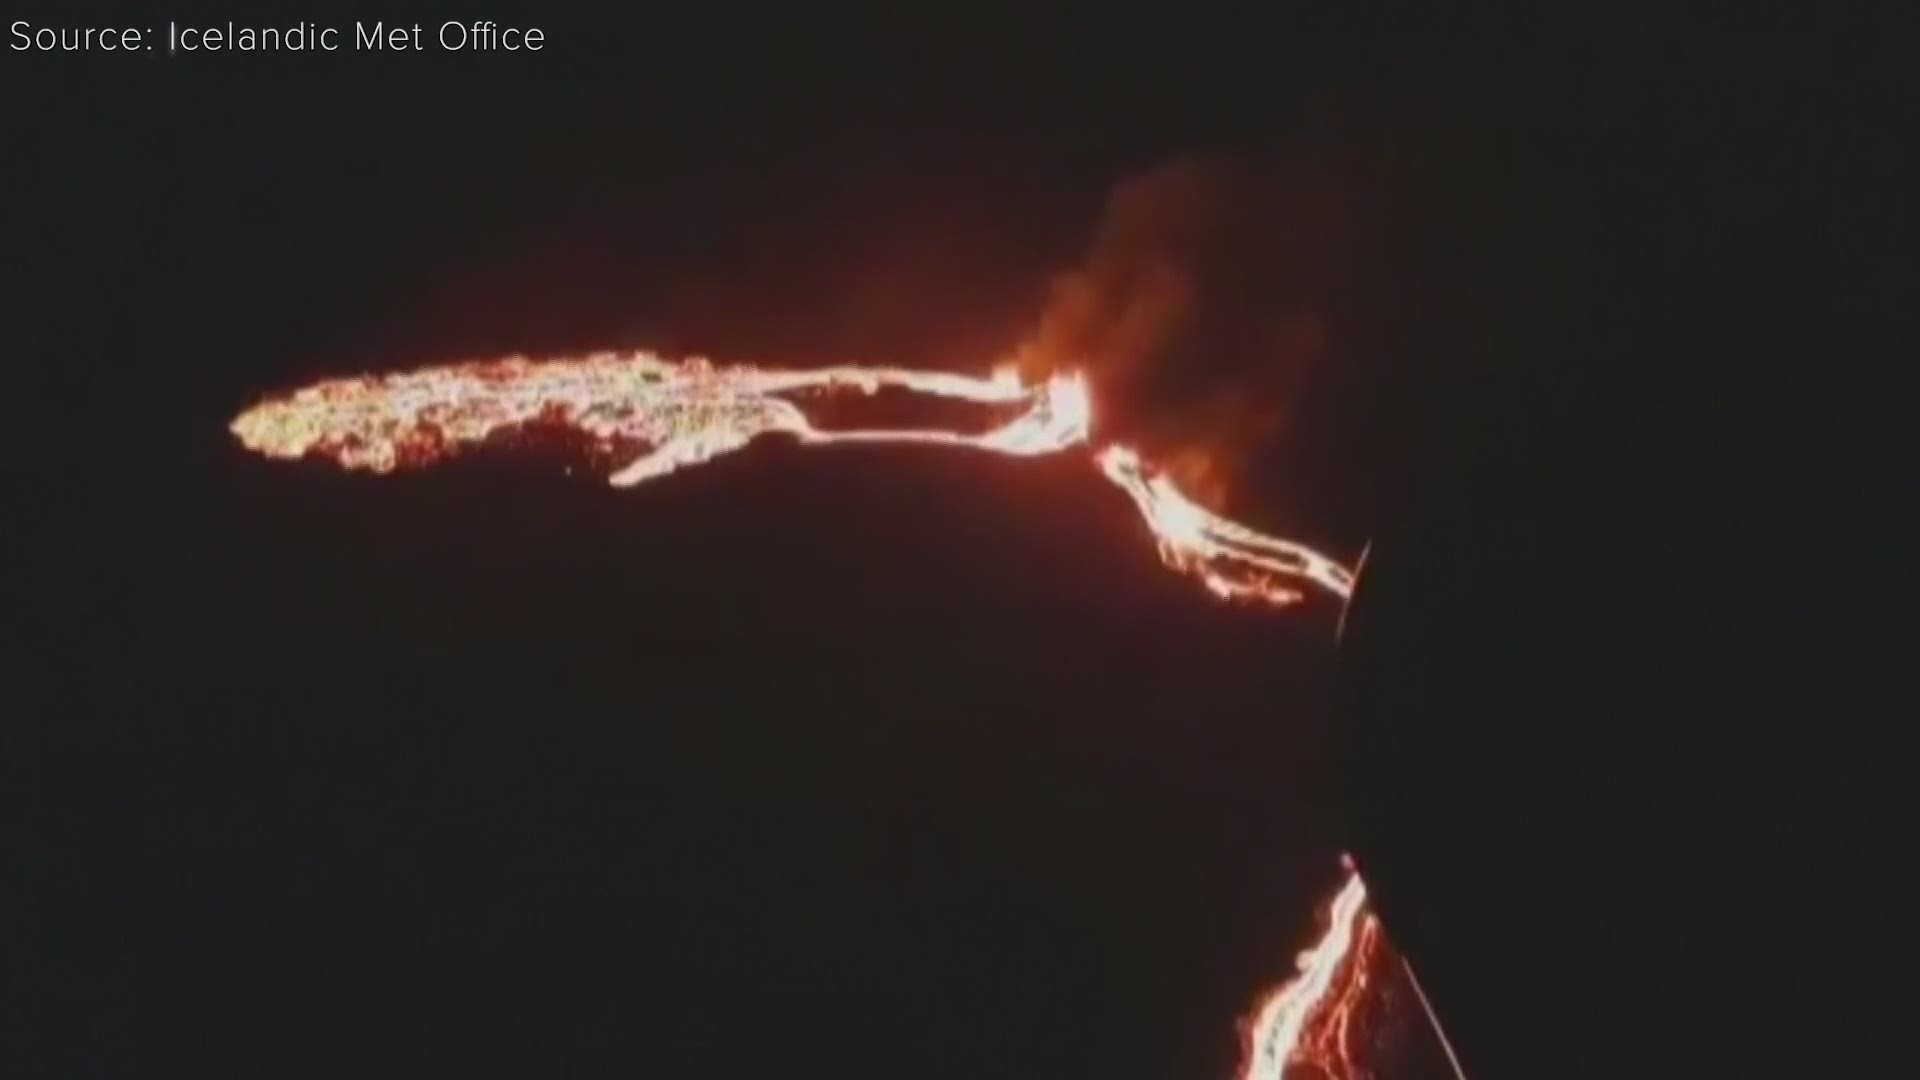 A long dormant volcano on the Reykjanes Peninsula in Iceland flared to life on Friday night, spilling lava down two sides.